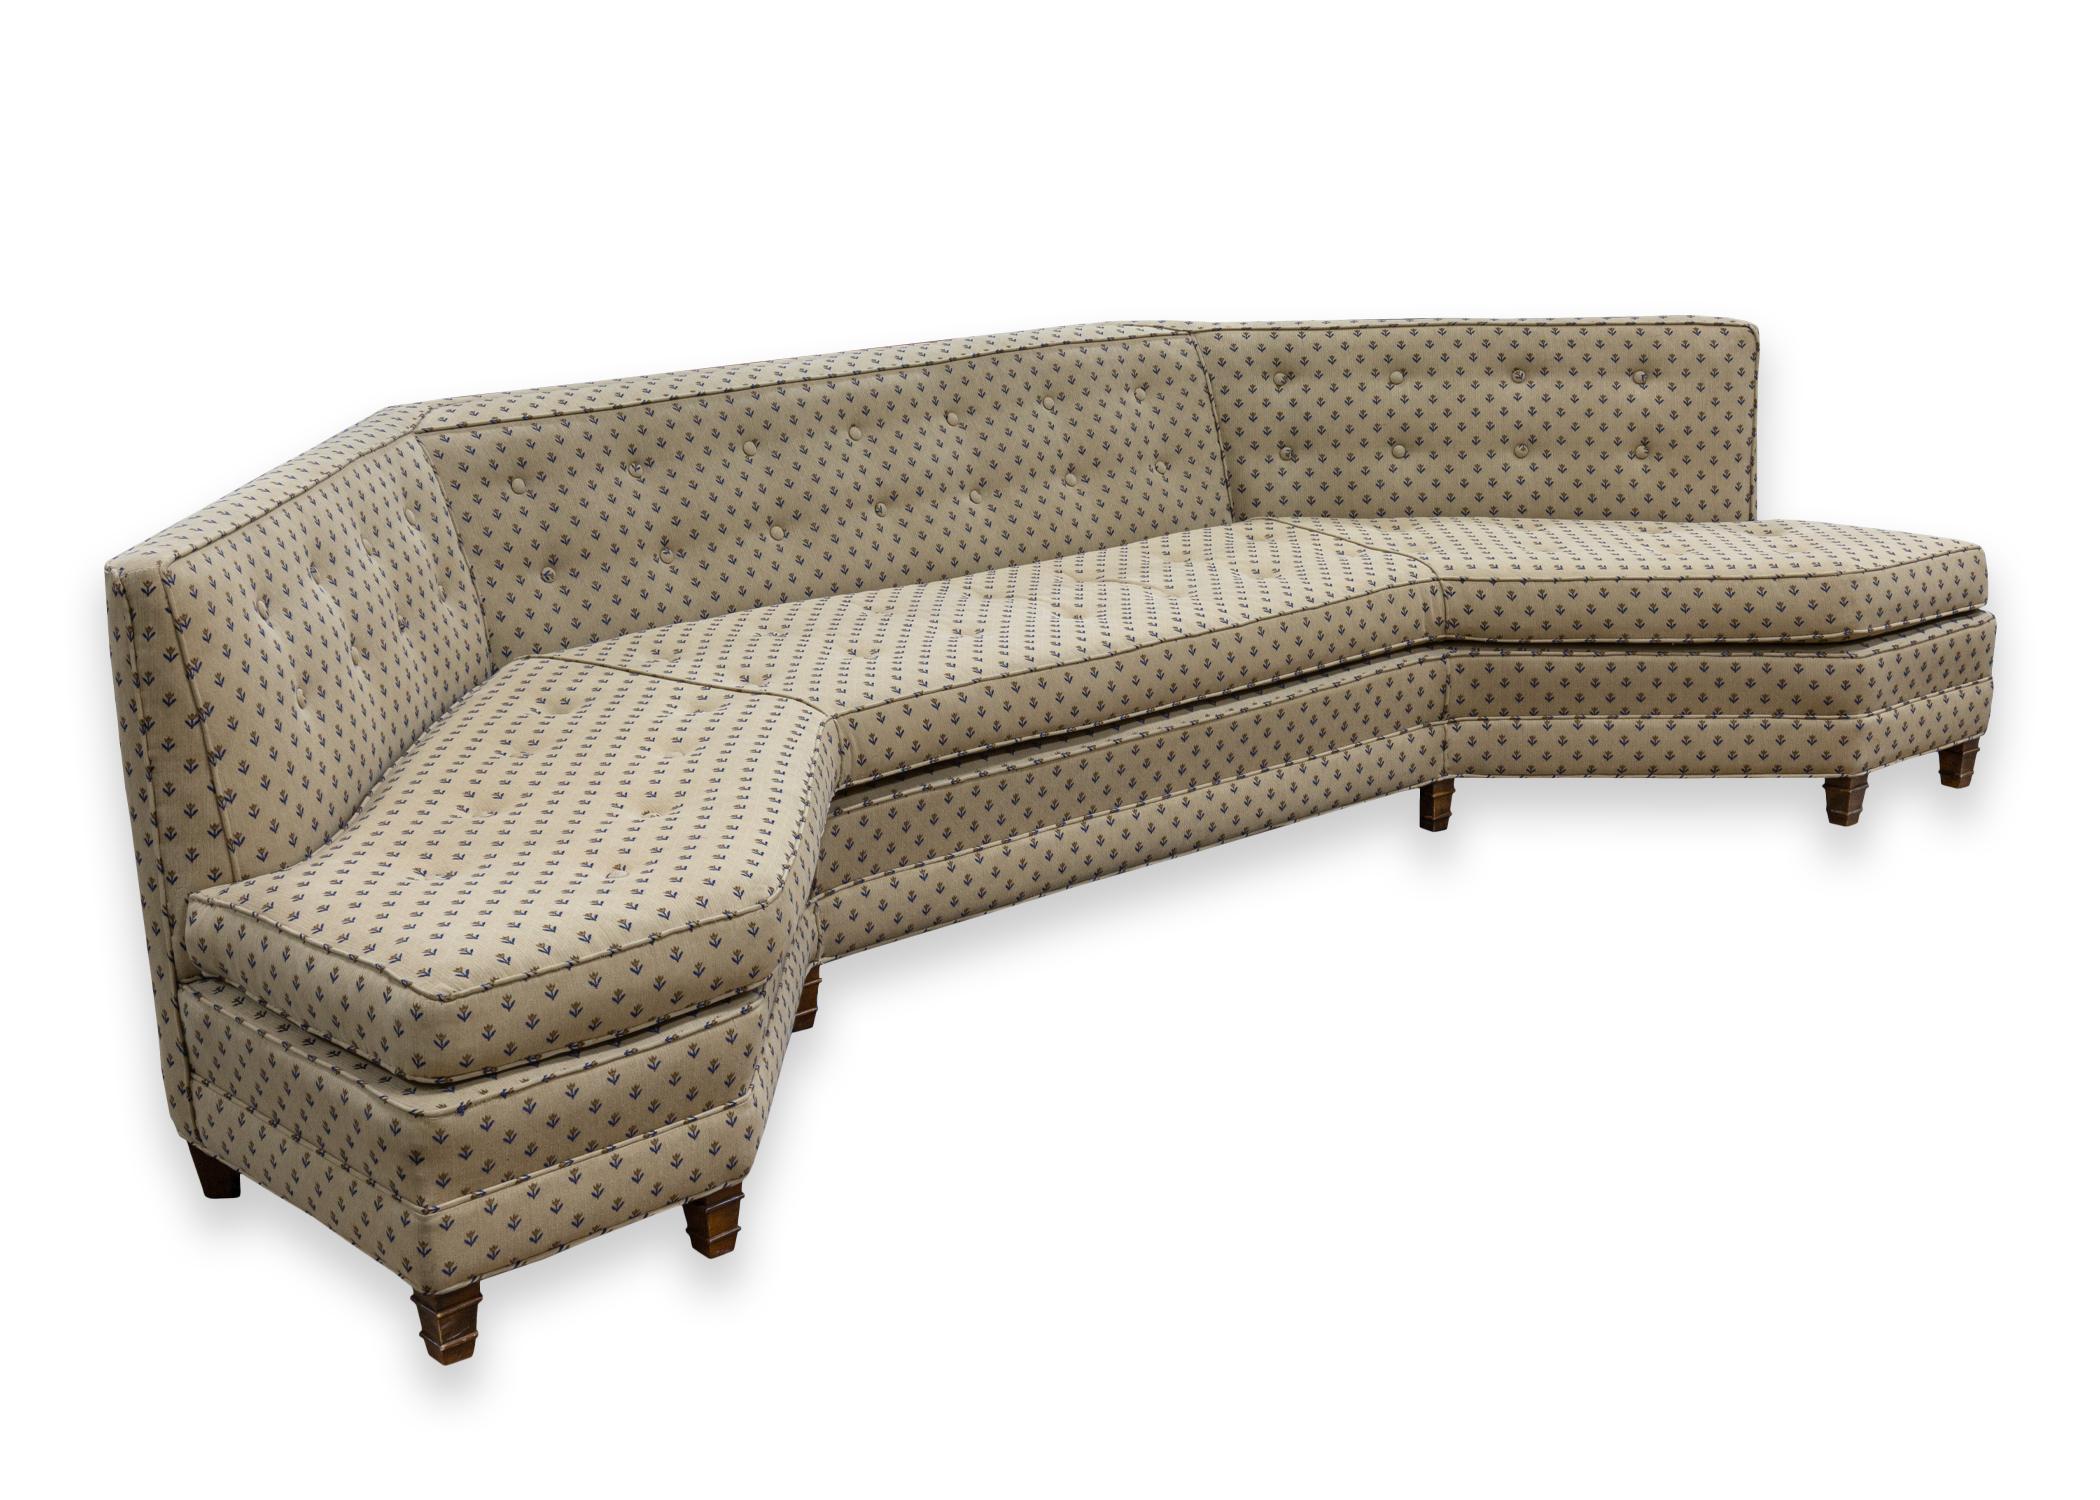 A curved sofa in the manner of Harvey Probber. A gorgeous mid century modern sofa piece with a unique curved shape and design. This piece is stunning with its combination of contemporary and traditional elements. This piece features a clean beige